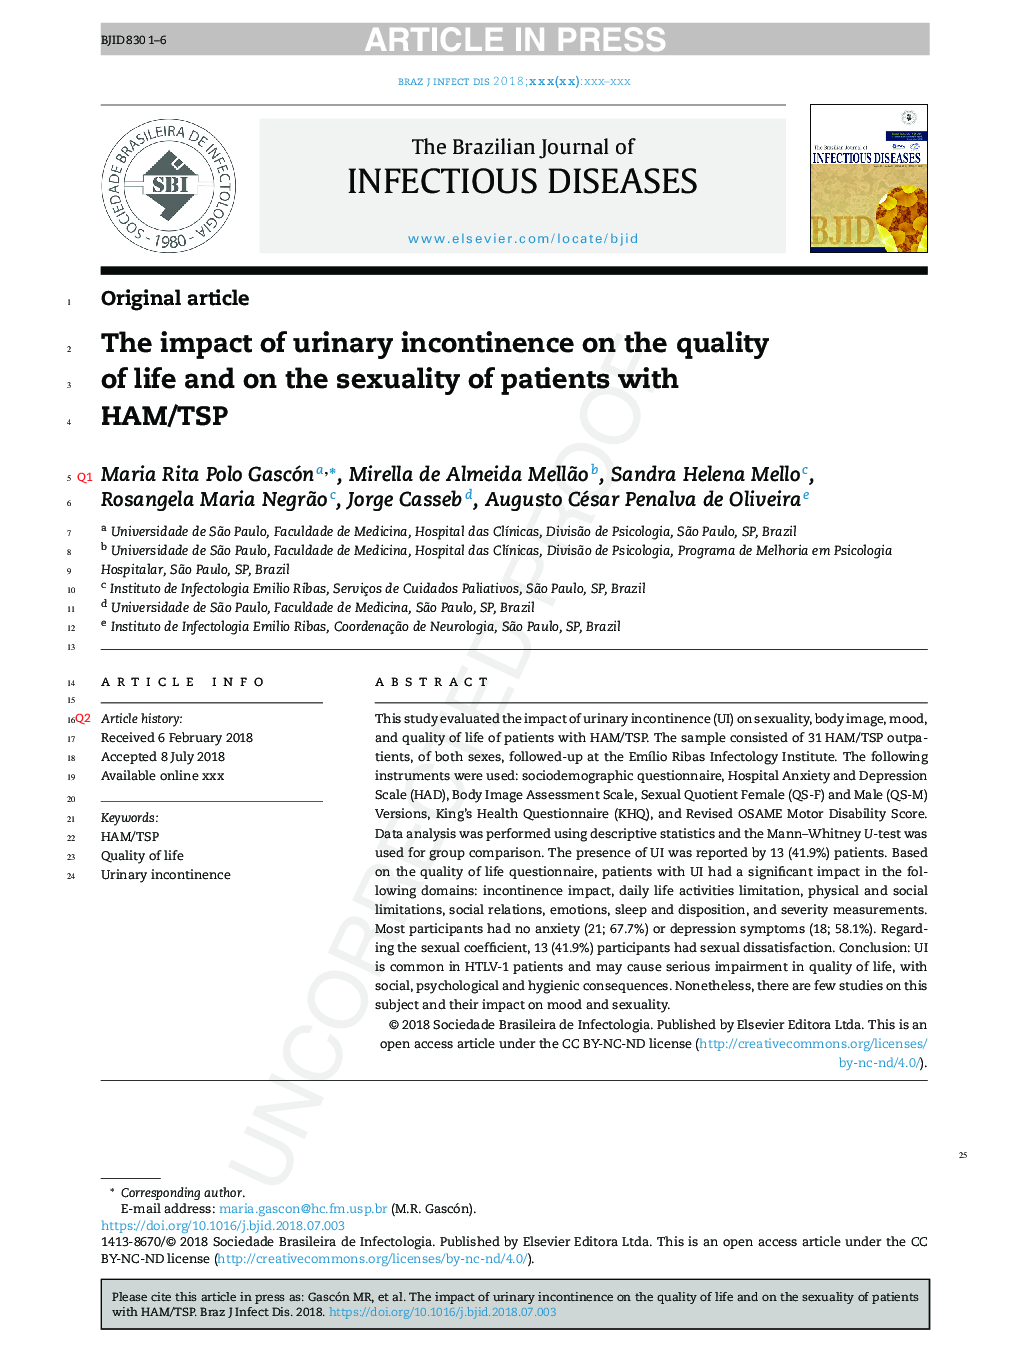 The impact of urinary incontinence on the quality of life and on the sexuality of patients with HAM/TSP